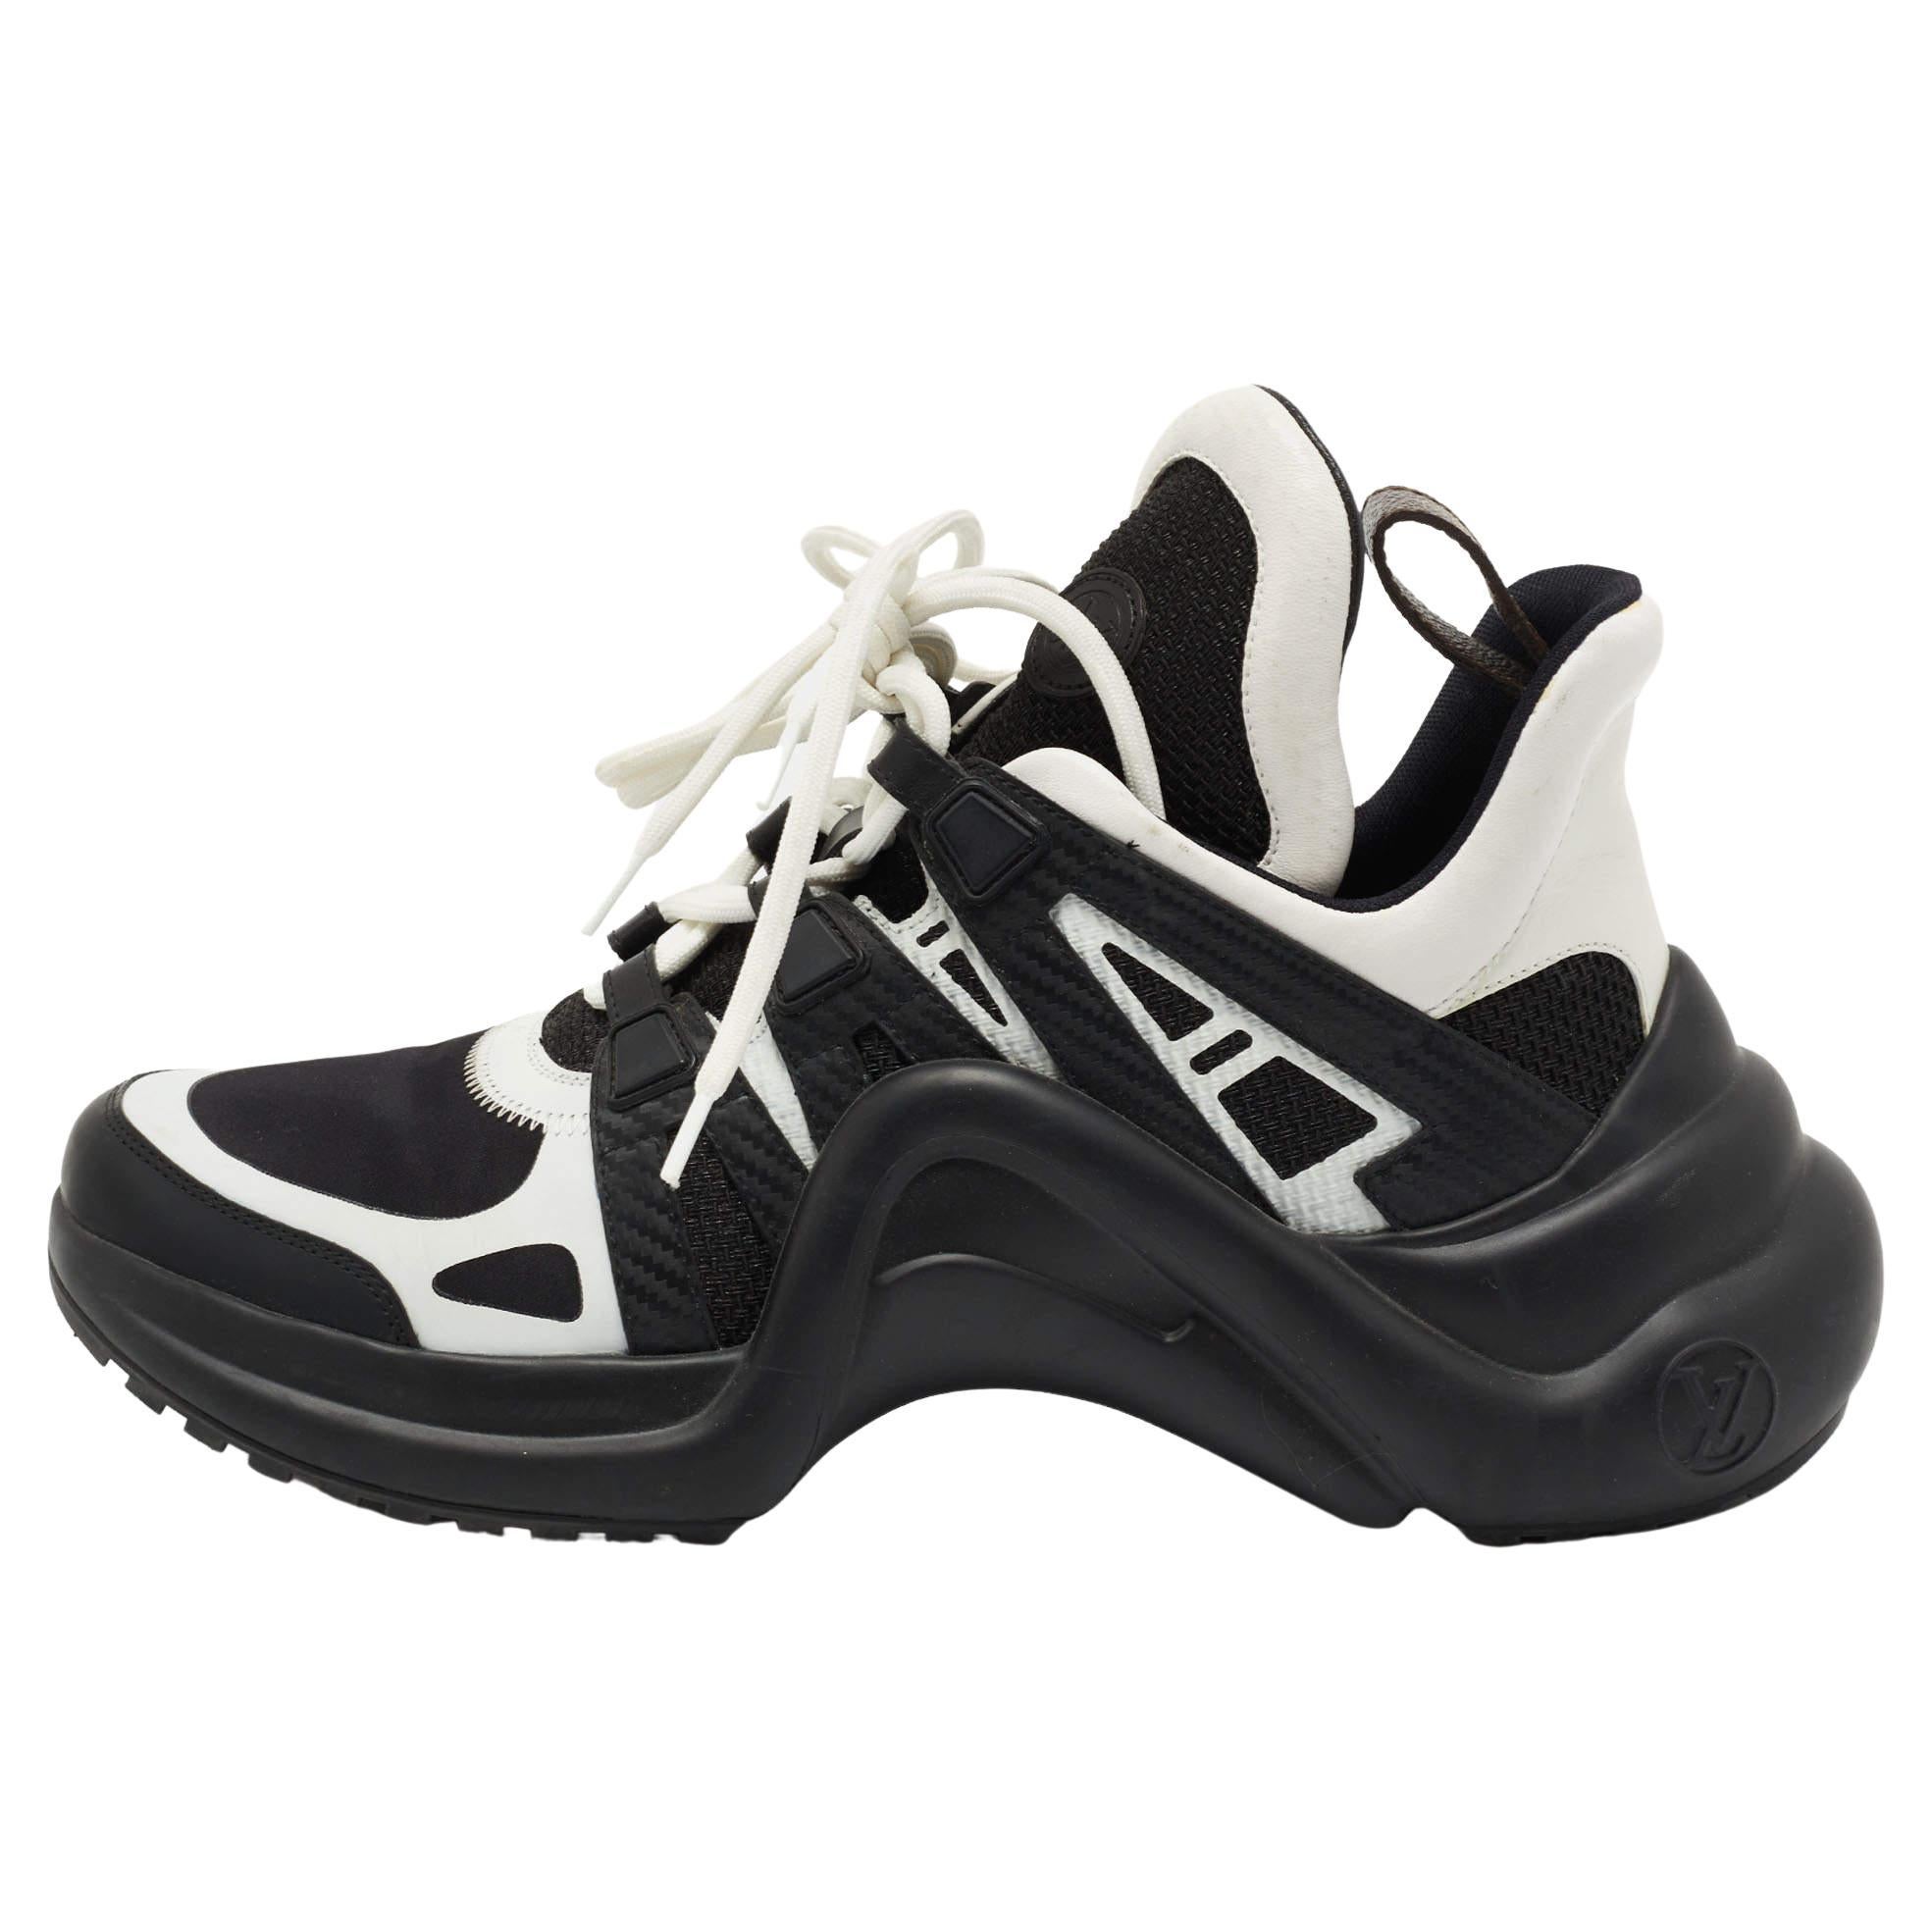 Louis Vuitton Archlight Sneakers Black And White - For Sale on